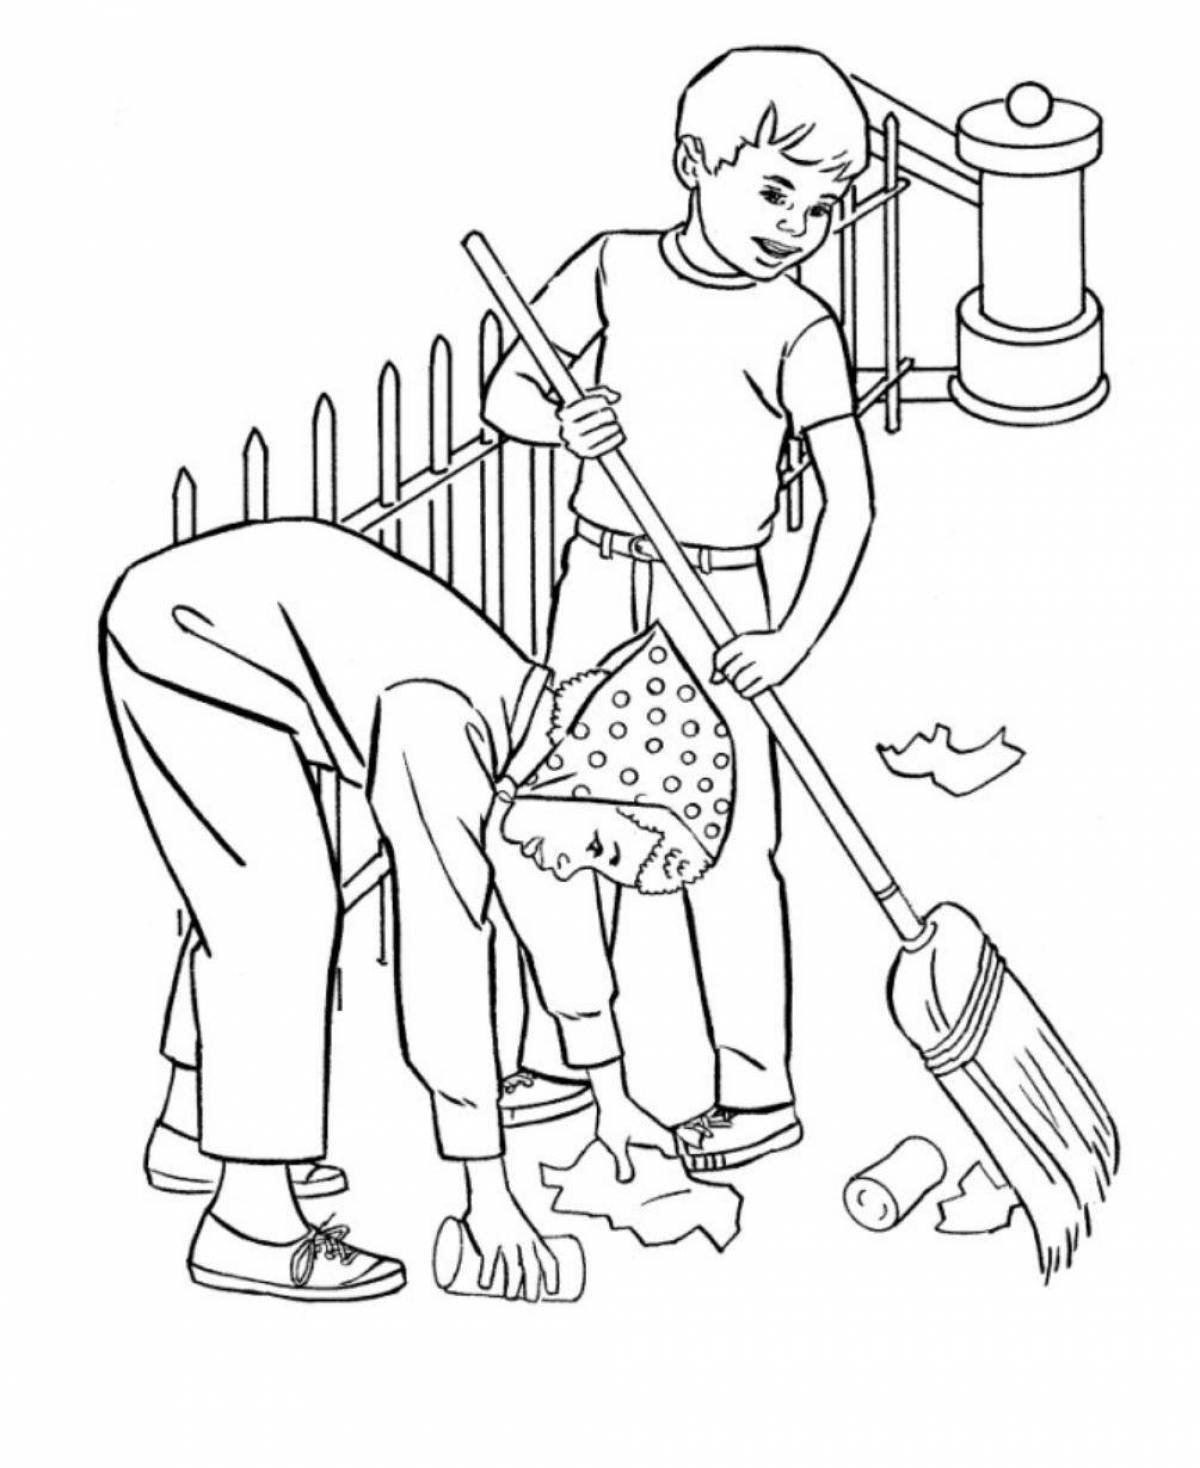 House cleaning for kids #2